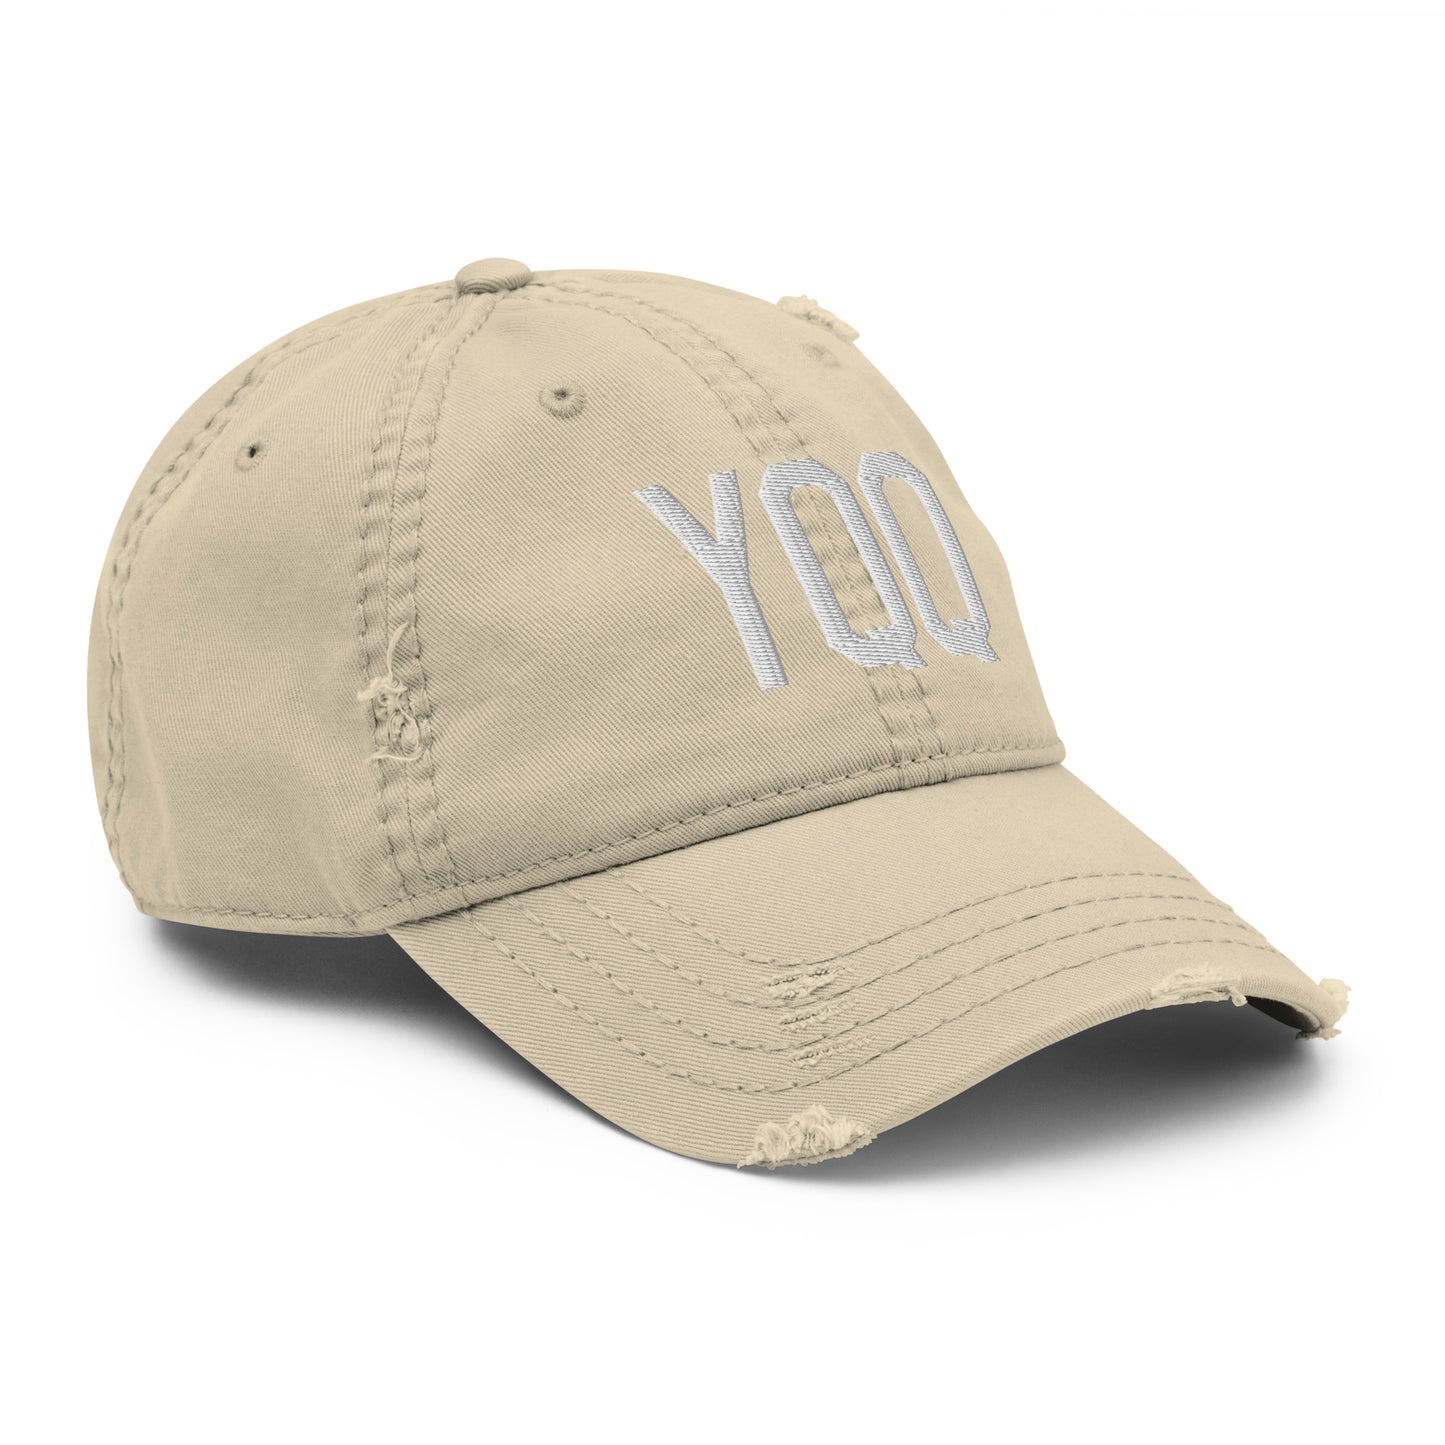 Airport Code Distressed Hat - White • YQQ Comox • YHM Designs - Image 20